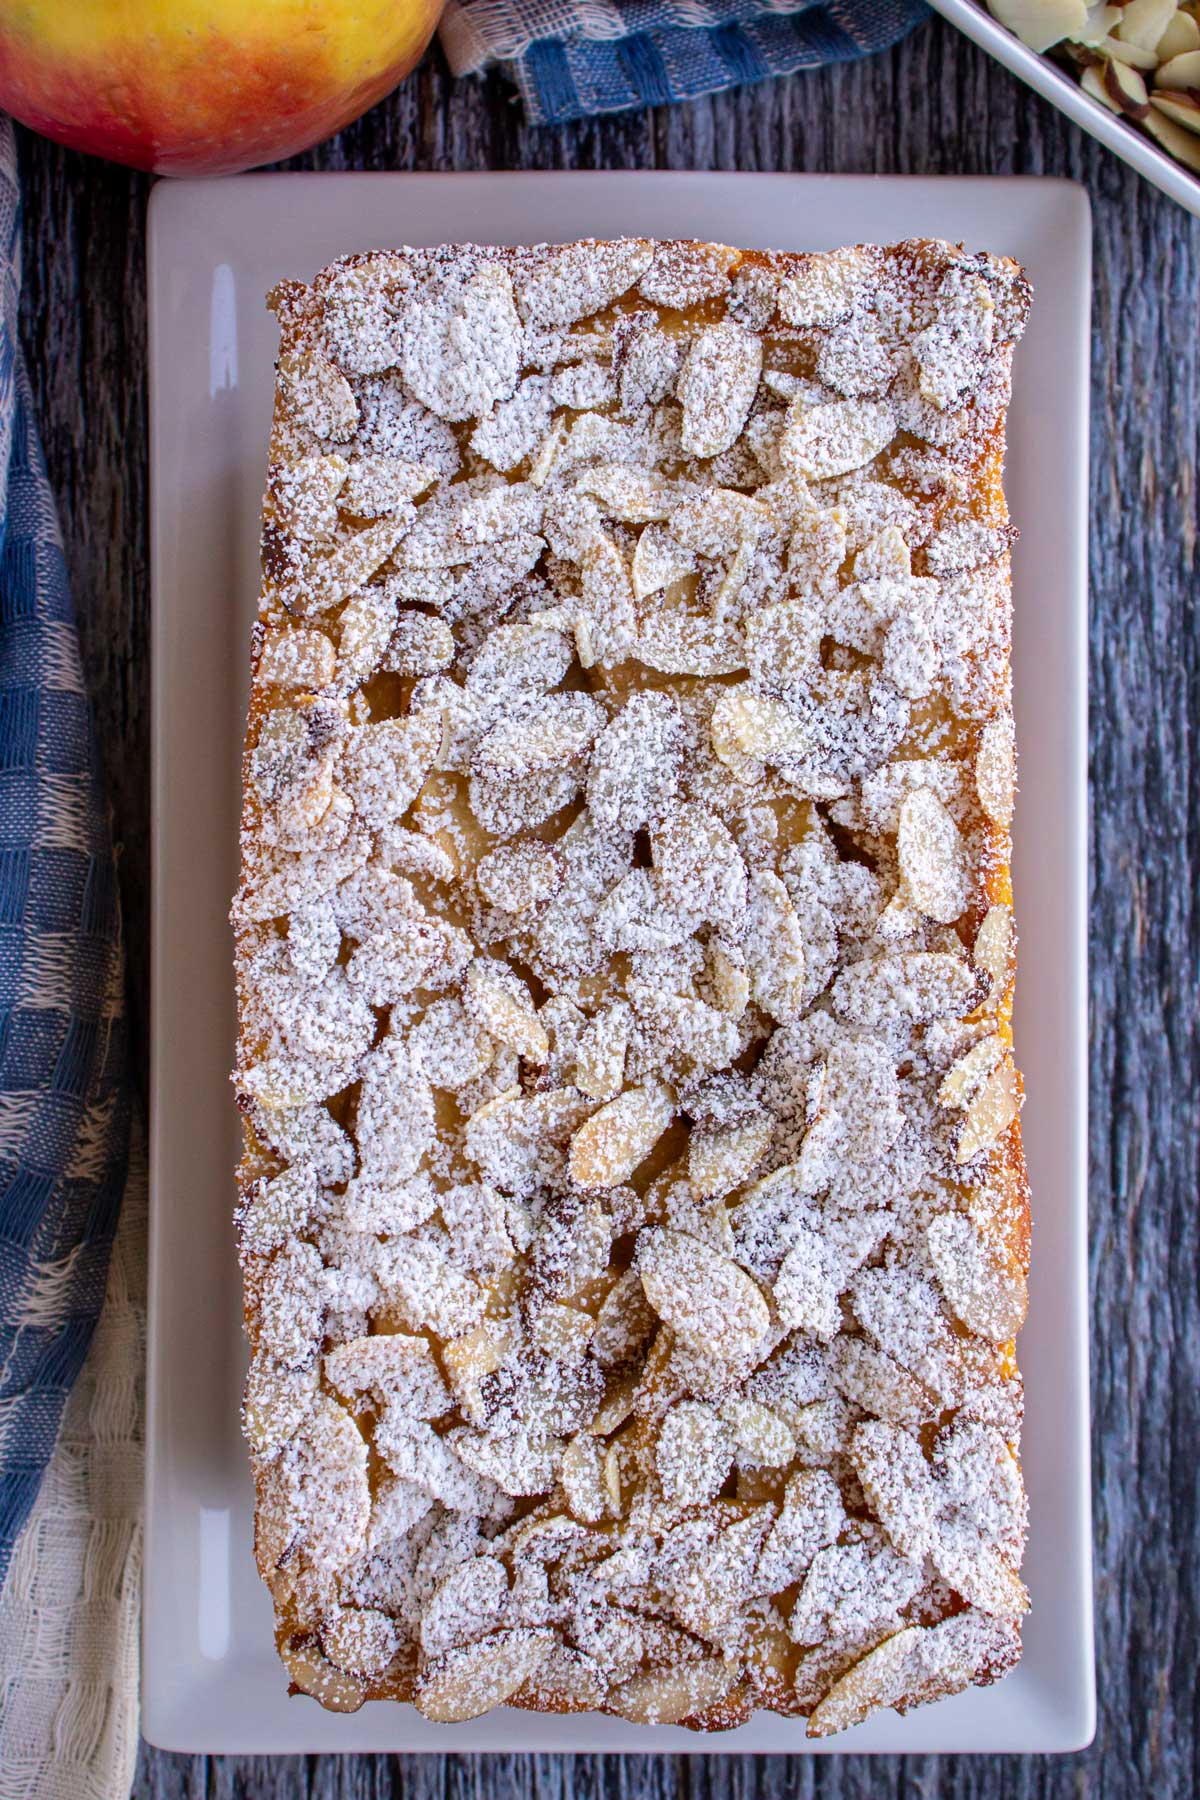 A rectangular invisible apple cake topped with powdered sugar dusted sliced almonds.